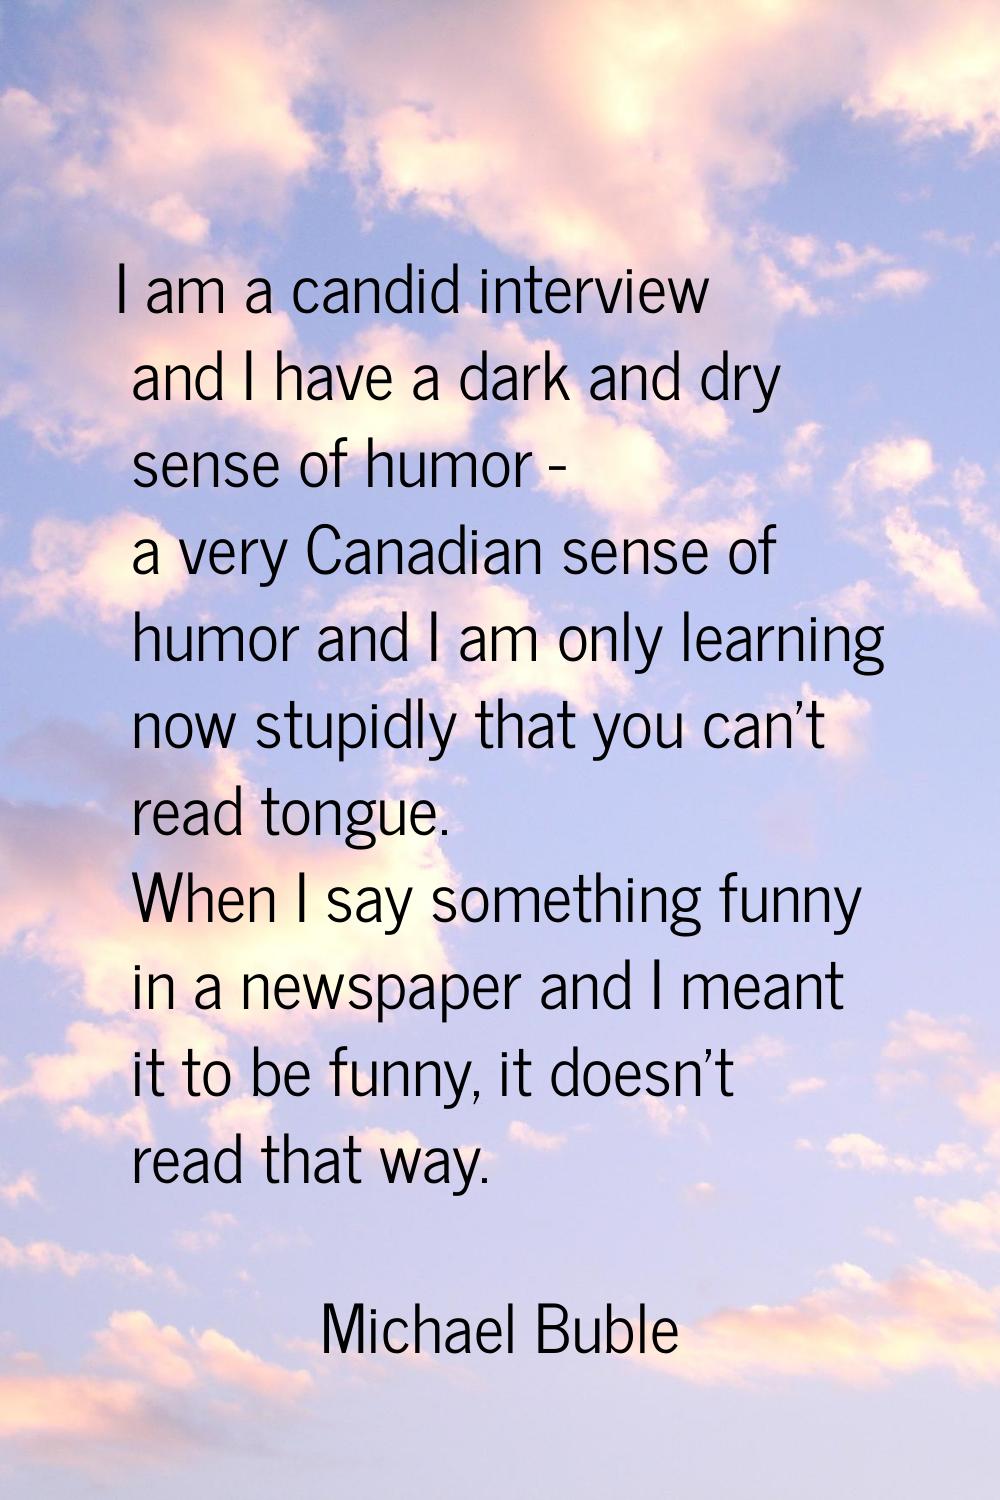 I am a candid interview and I have a dark and dry sense of humor - a very Canadian sense of humor a